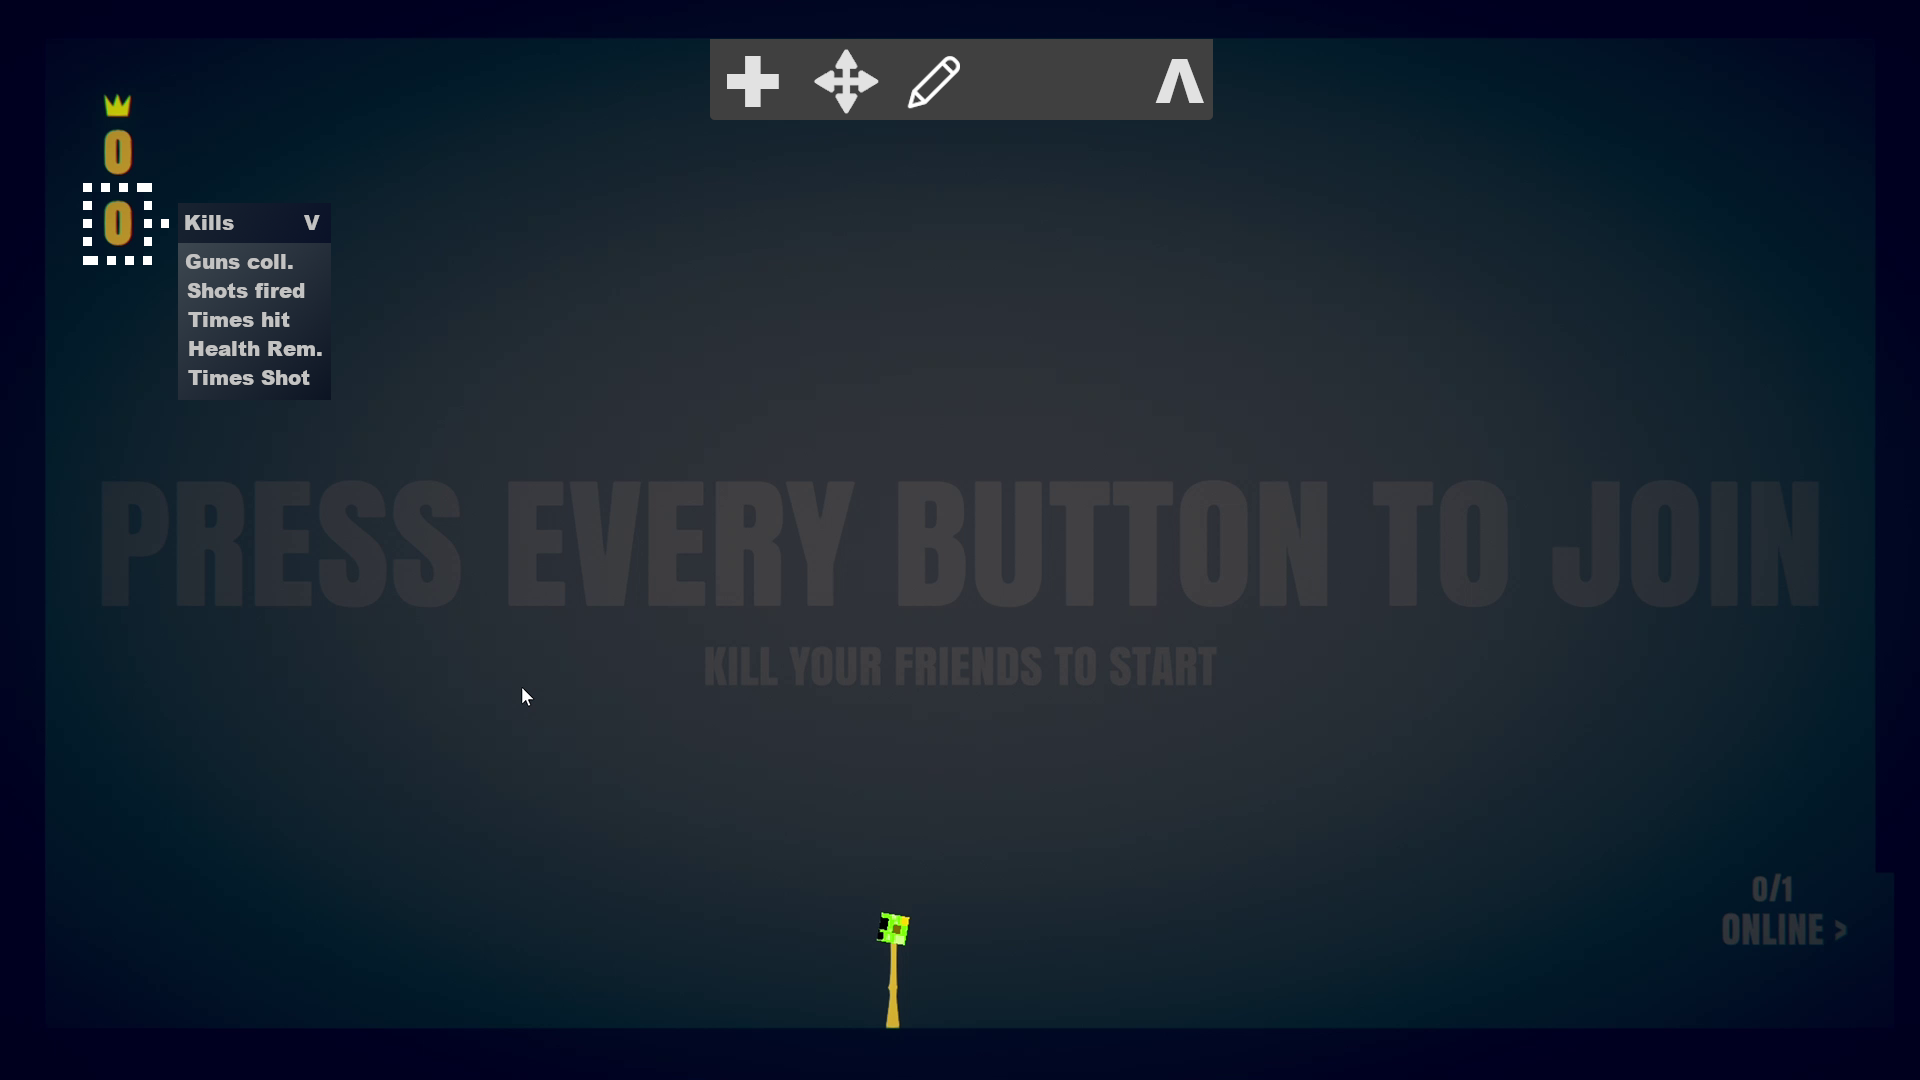 Press every button to join - Stick Fight: The Game